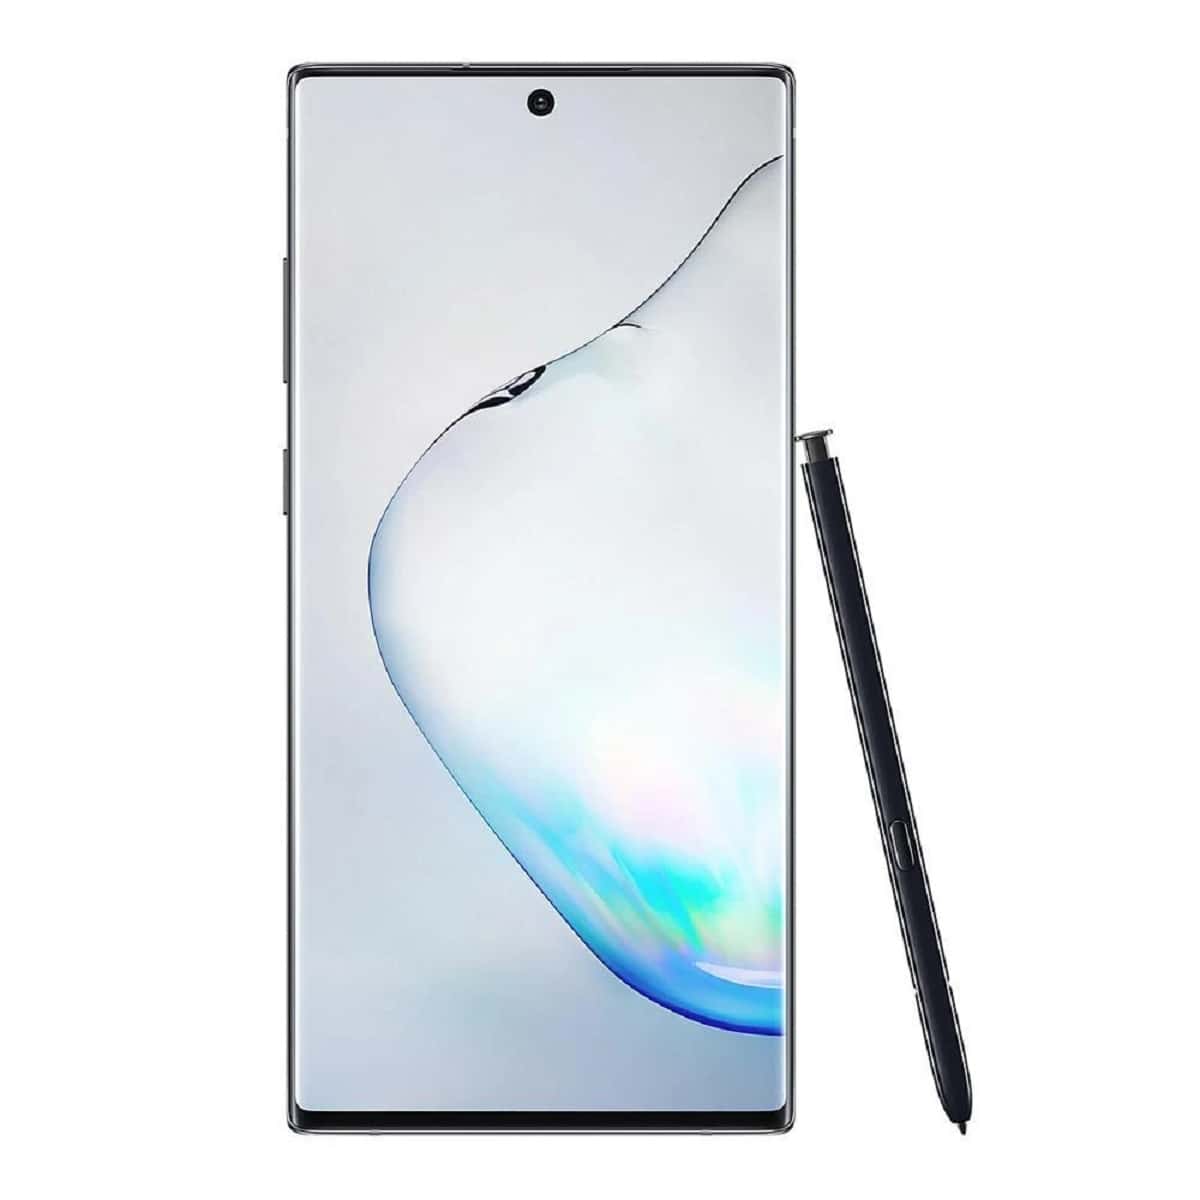 One UI 3.0 update now rolling out to Samsung Galaxy Note 10+ users in Europe